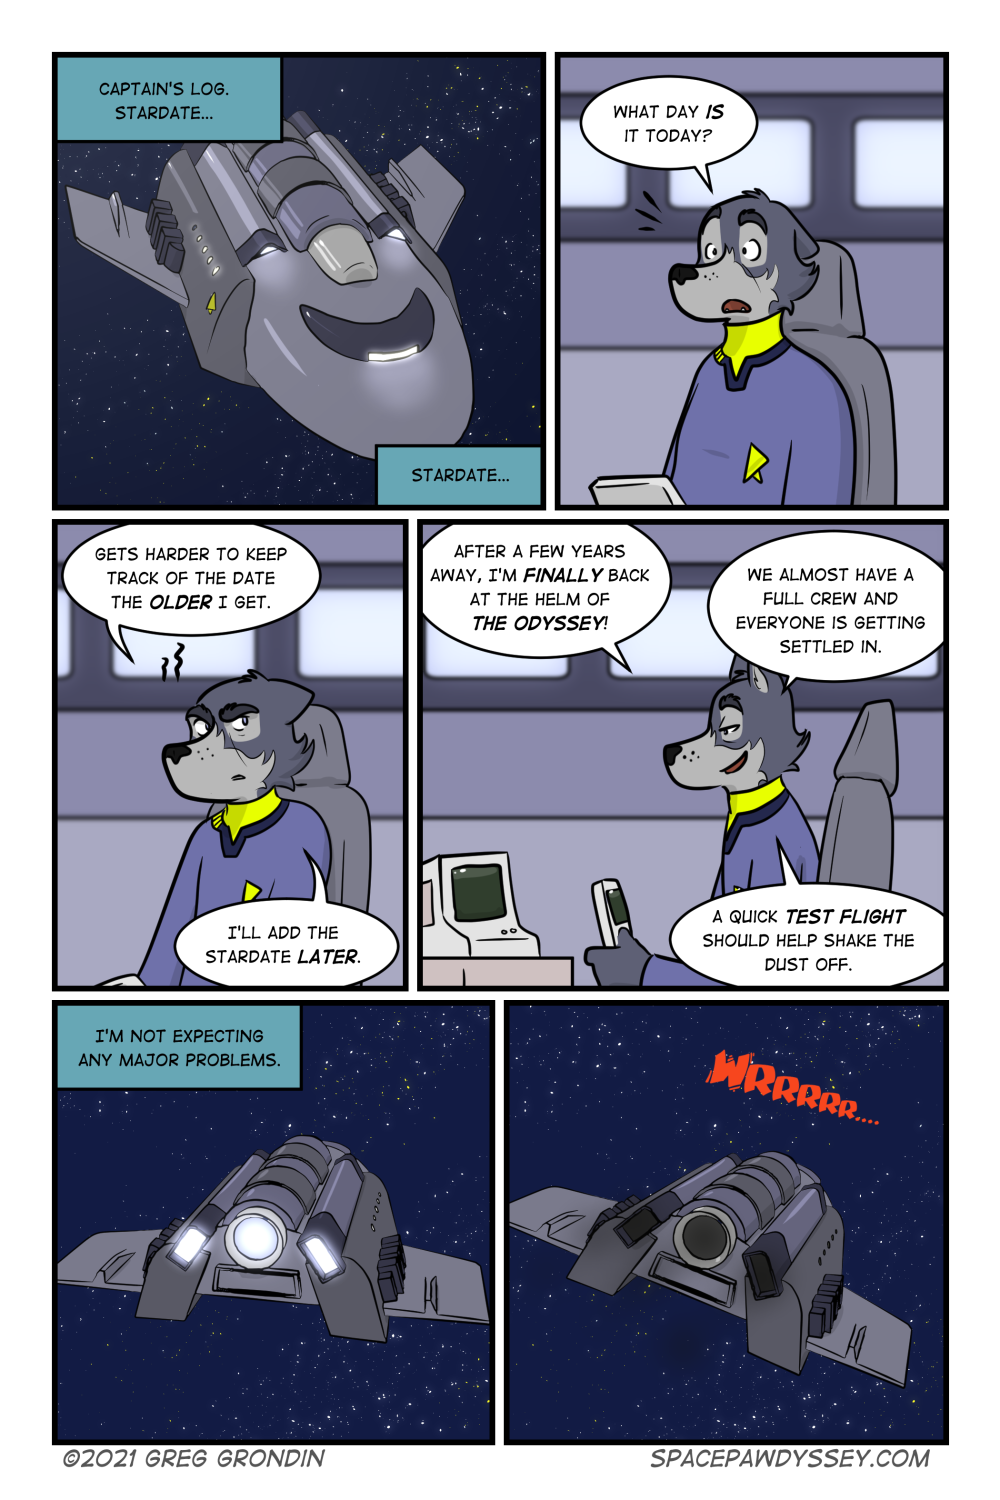 Space Pawdyssey #504